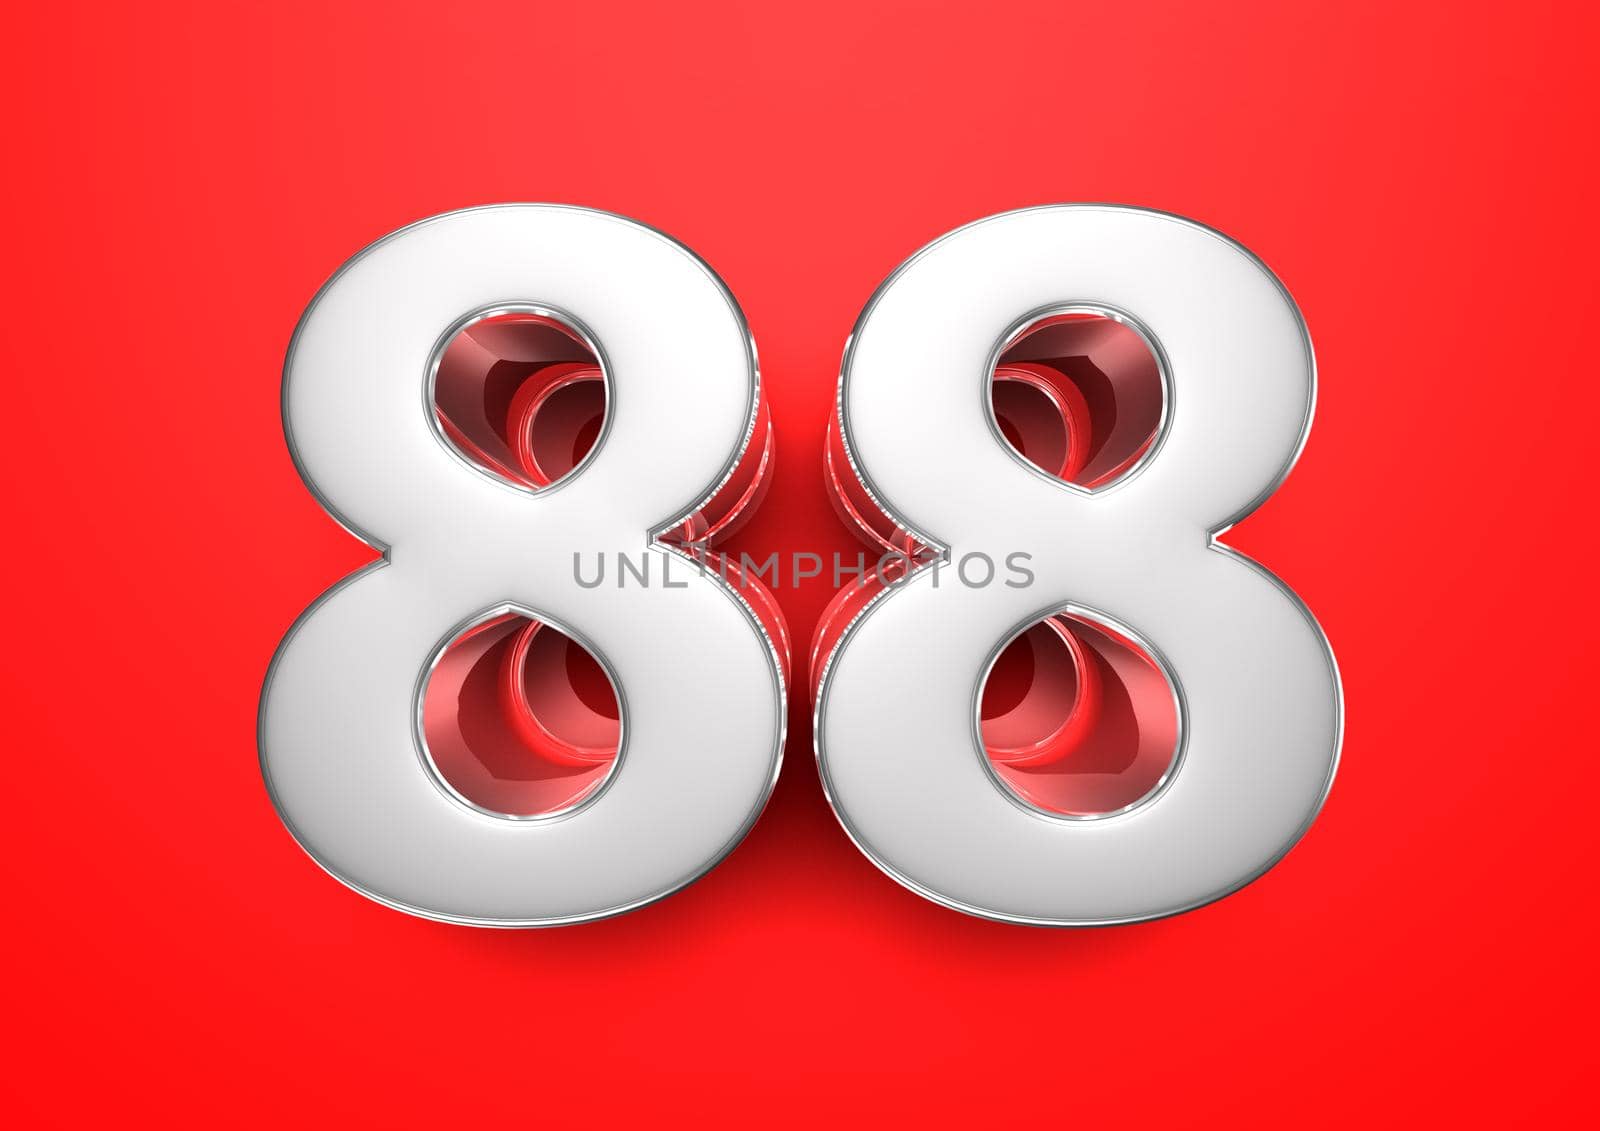 Price tag 88. Anniversary 88. Number 88 3D illustration on a red background.